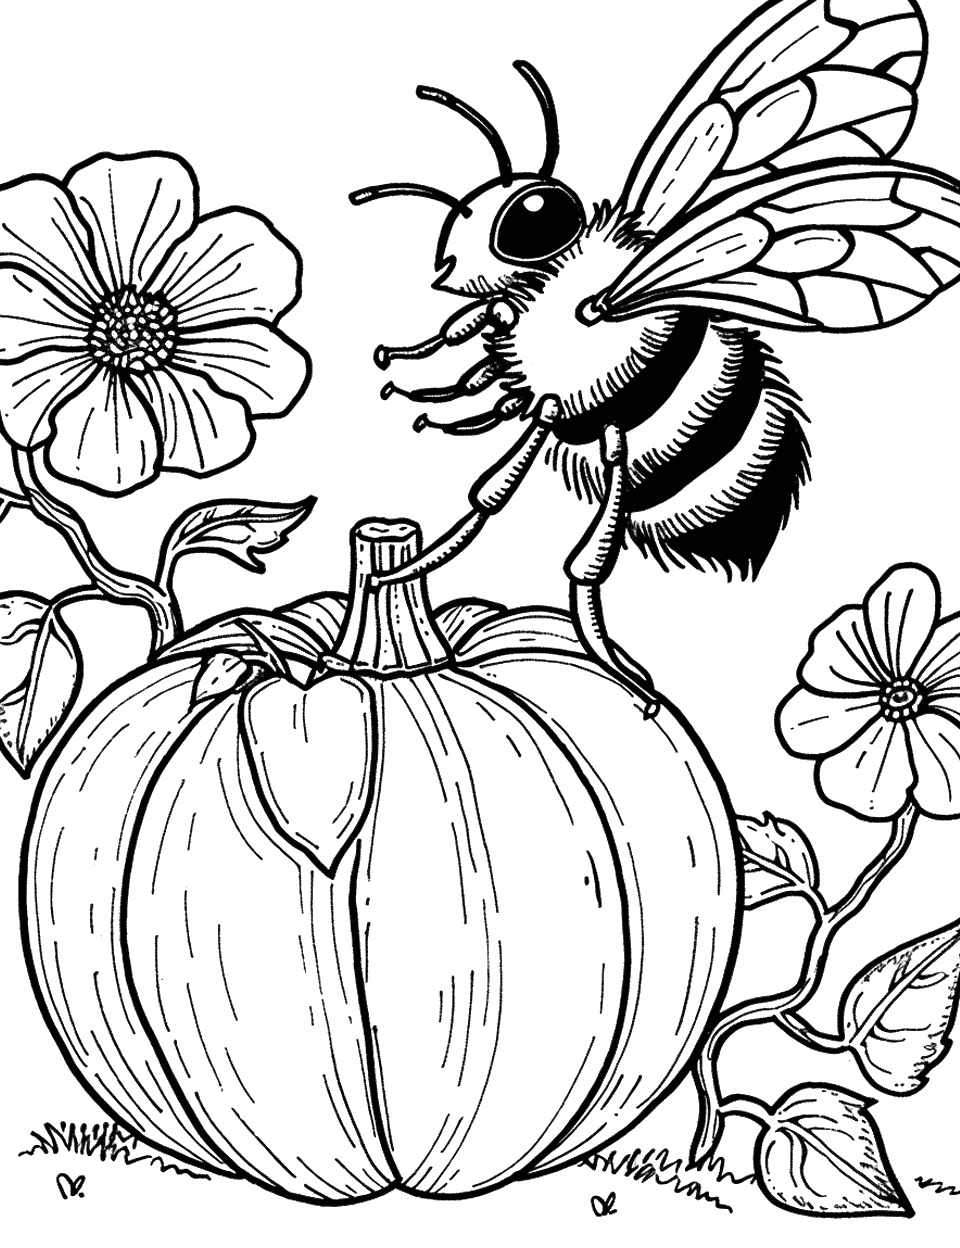 Bee and Pumpkin Blossom Coloring Page - A bee investigating the large flower of a pumpkin.